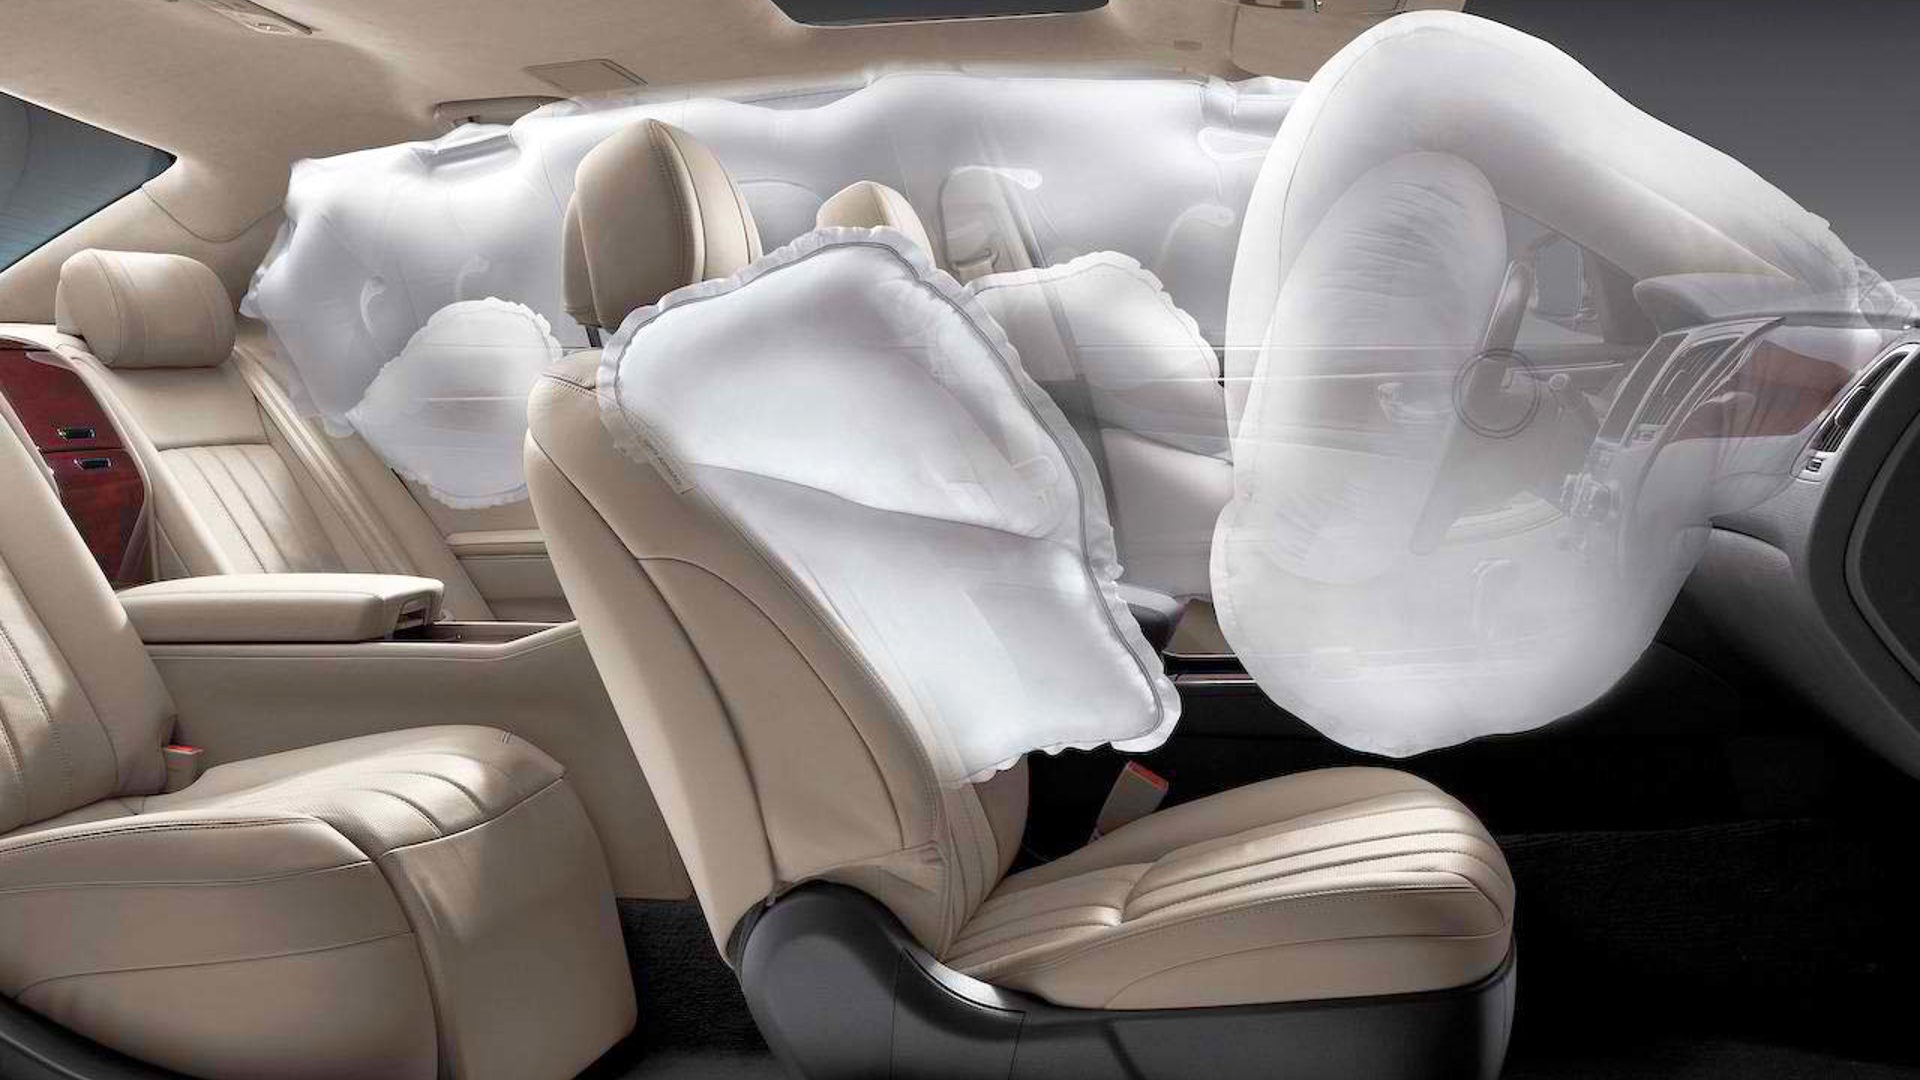 In 1998, Toyota and Volvo introduced curtain-style side airbags. That first Toyota was a Japanese-market luxury model called the Progres (pronounced pro-gray), and Volvo put a similar system into its 1998 S80 flagship sedan.